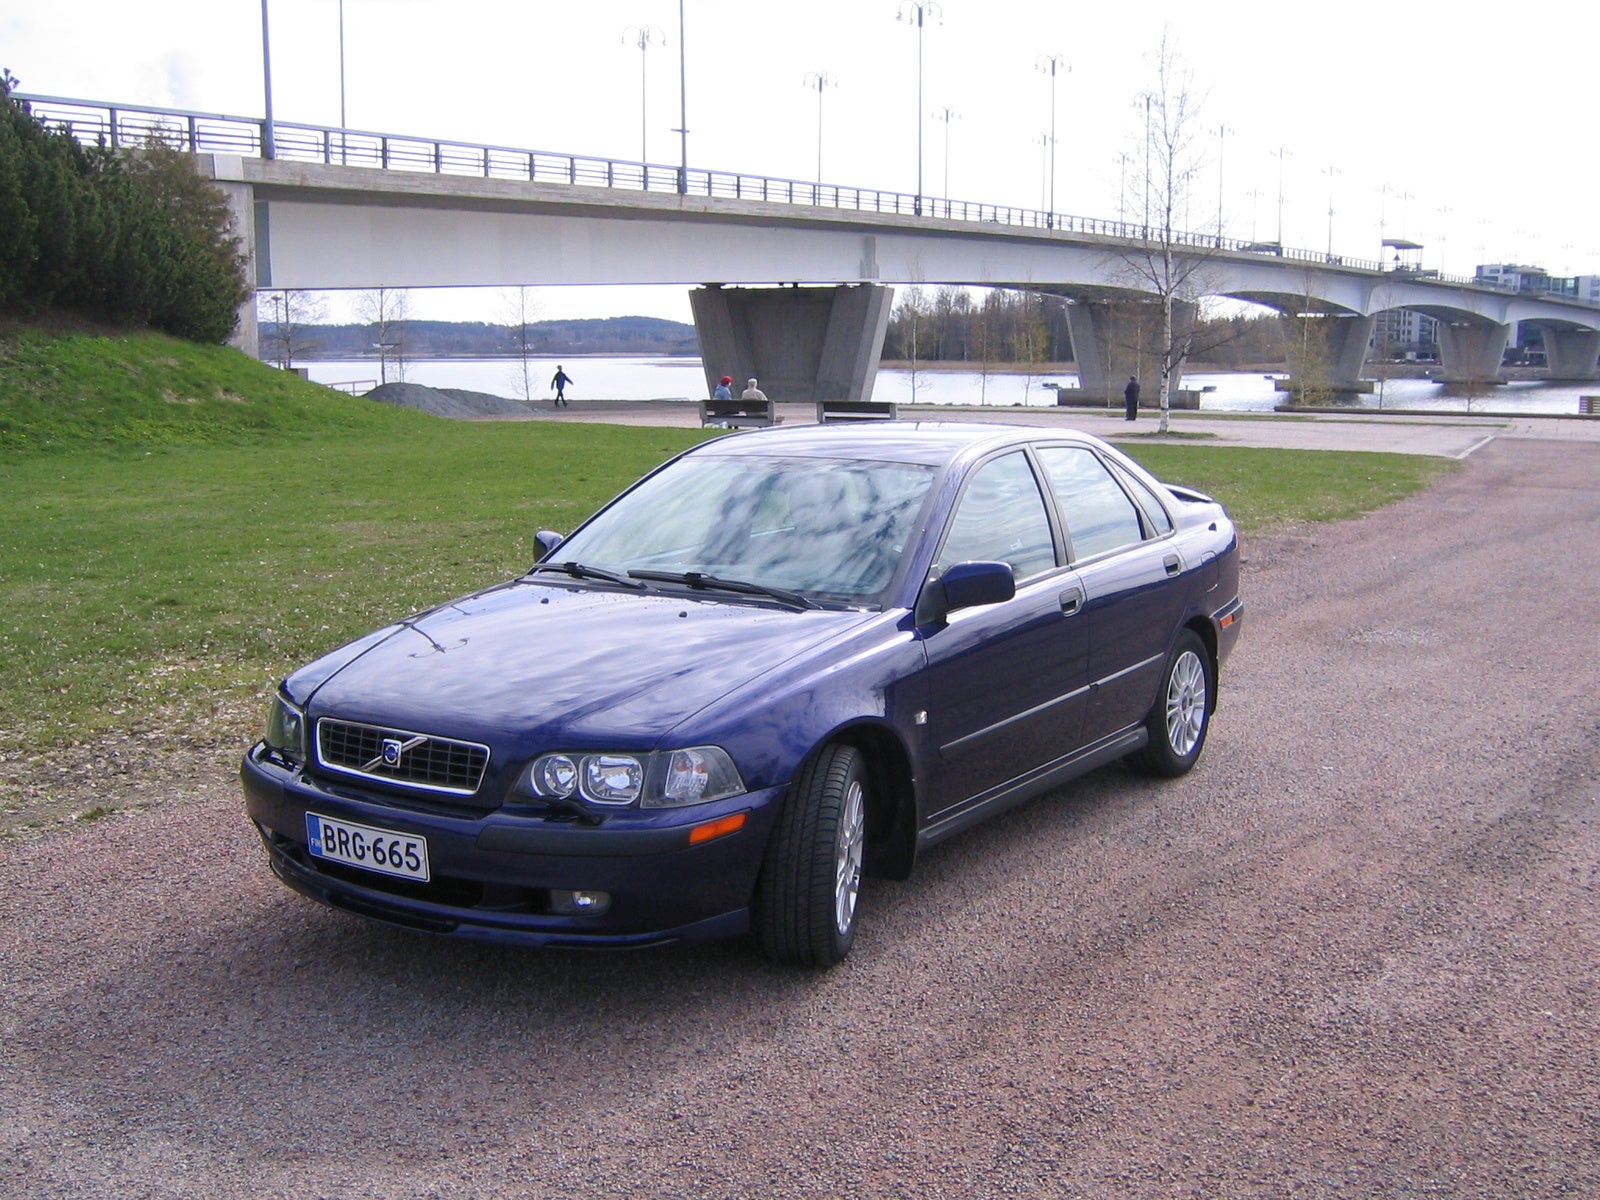 Volvo   on Volvo S40 Picture View Garage Simo Used To Own This Volvo S40 Check